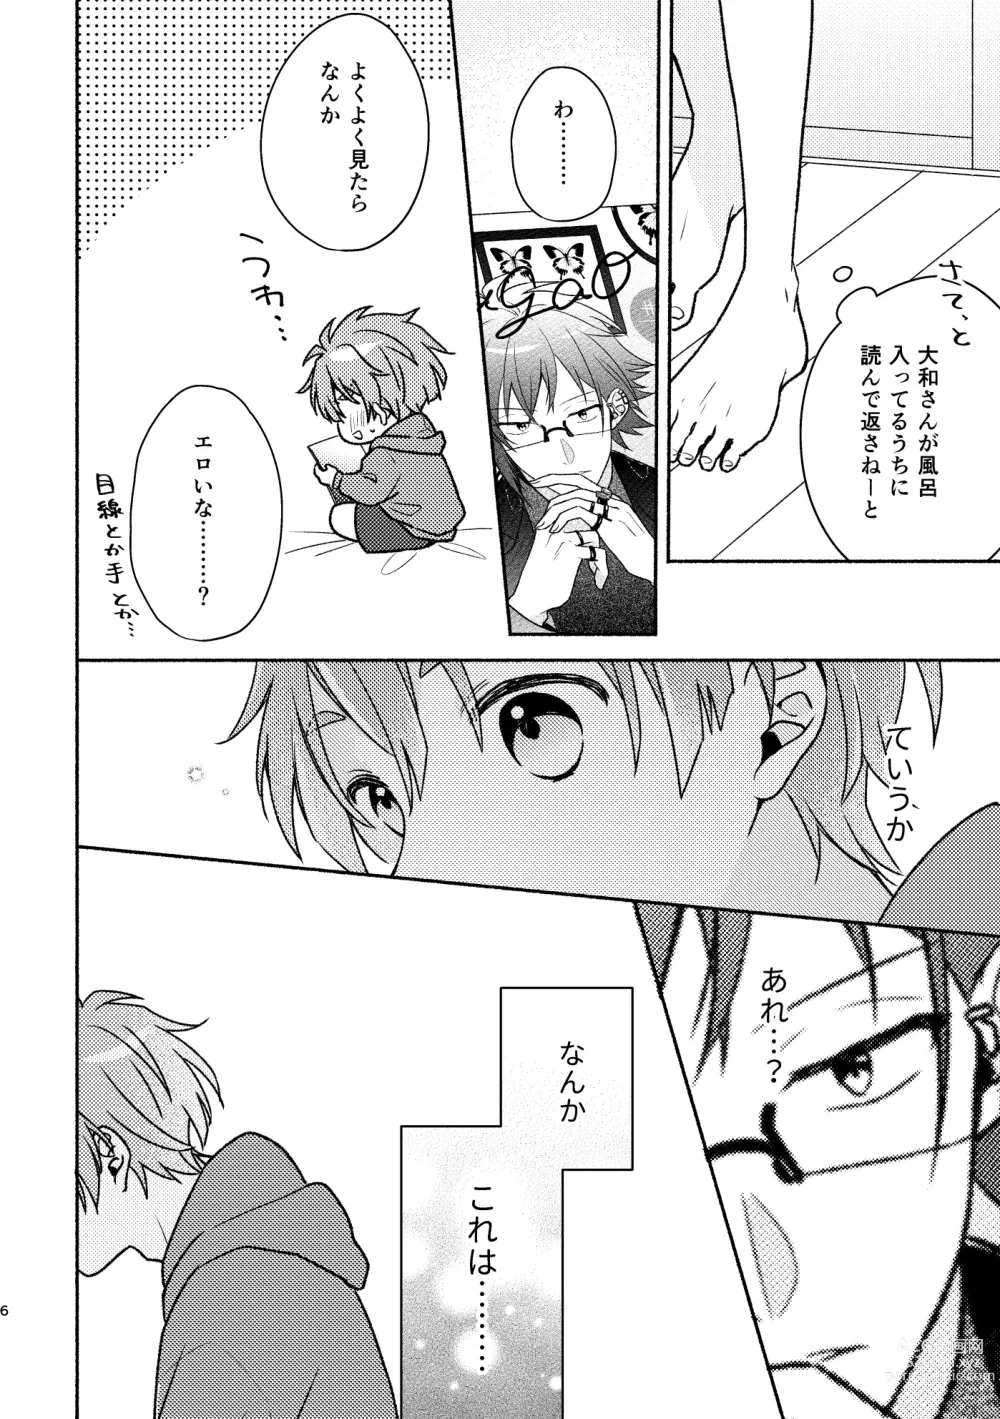 Page 5 of doujinshi Secret Expectations